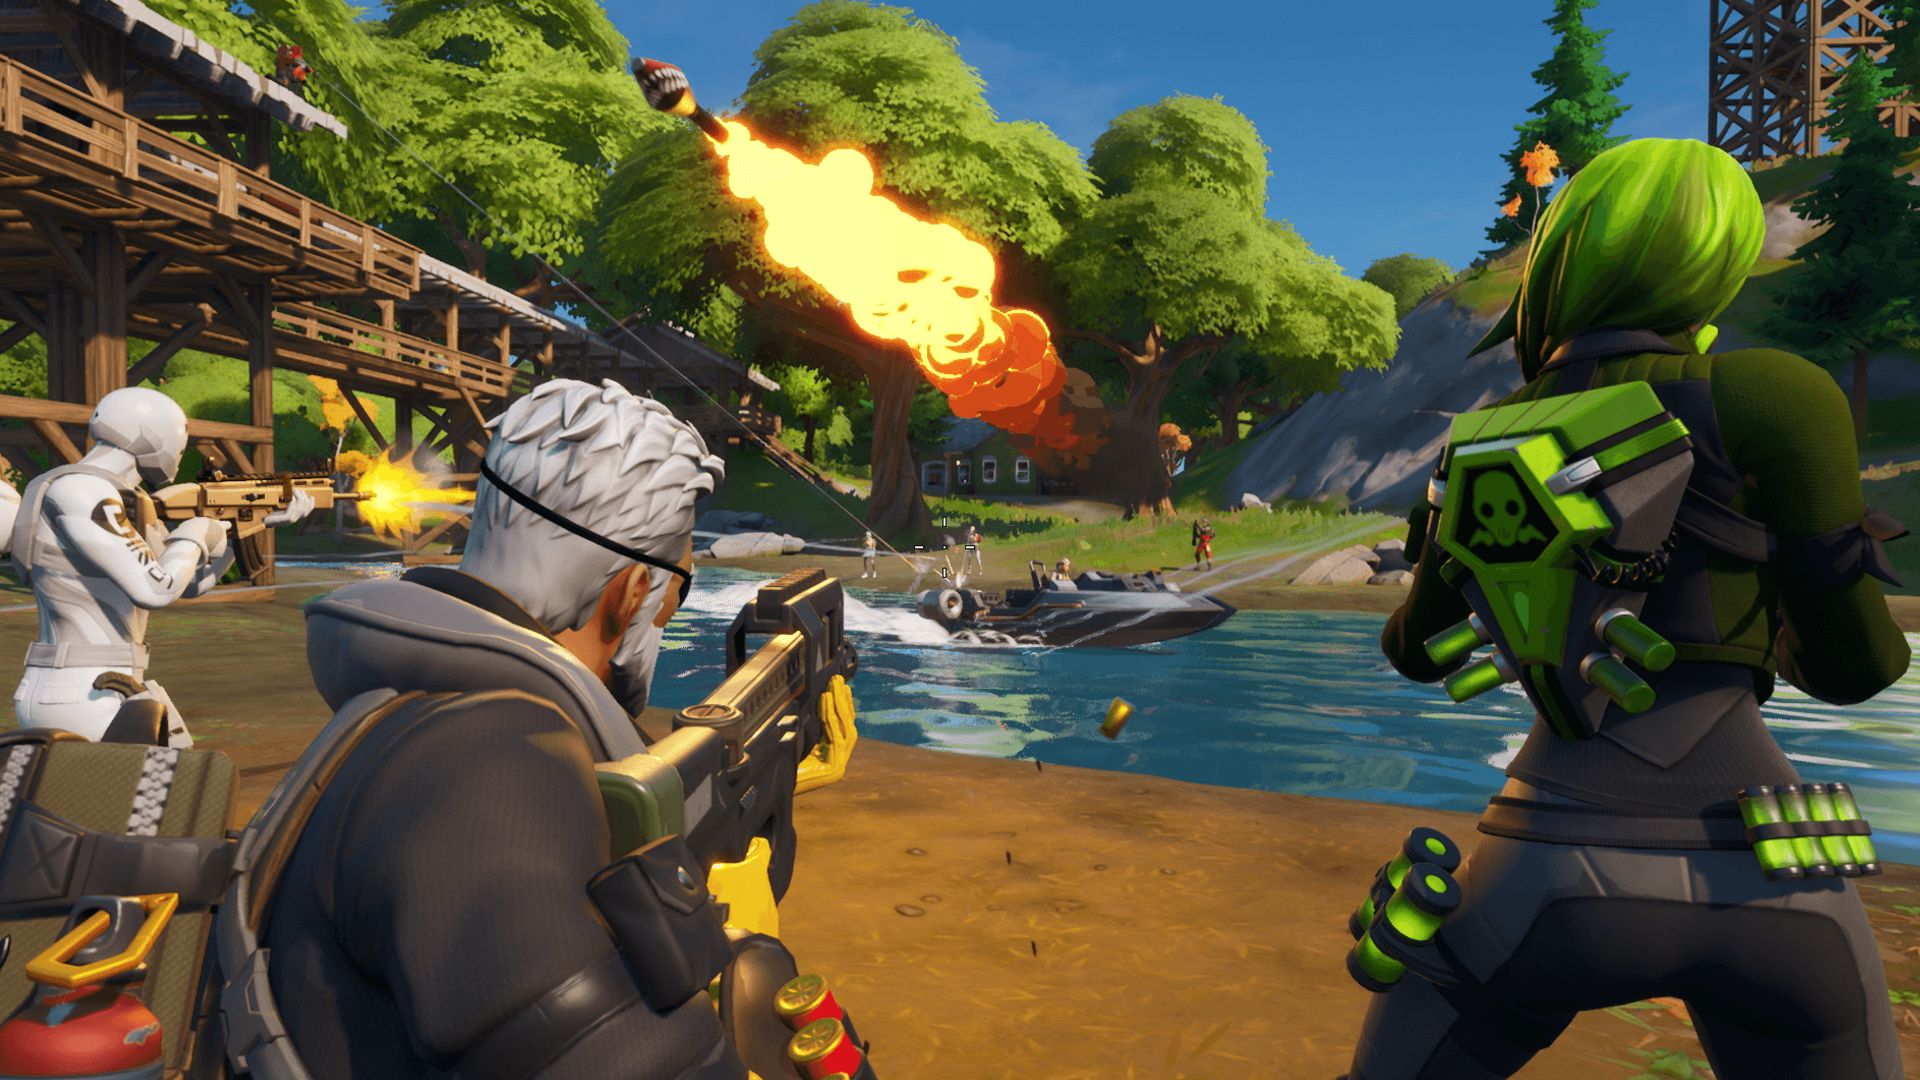 Fortnite free V-bucks: multiple people are shooting at a boat launching missiles at them.